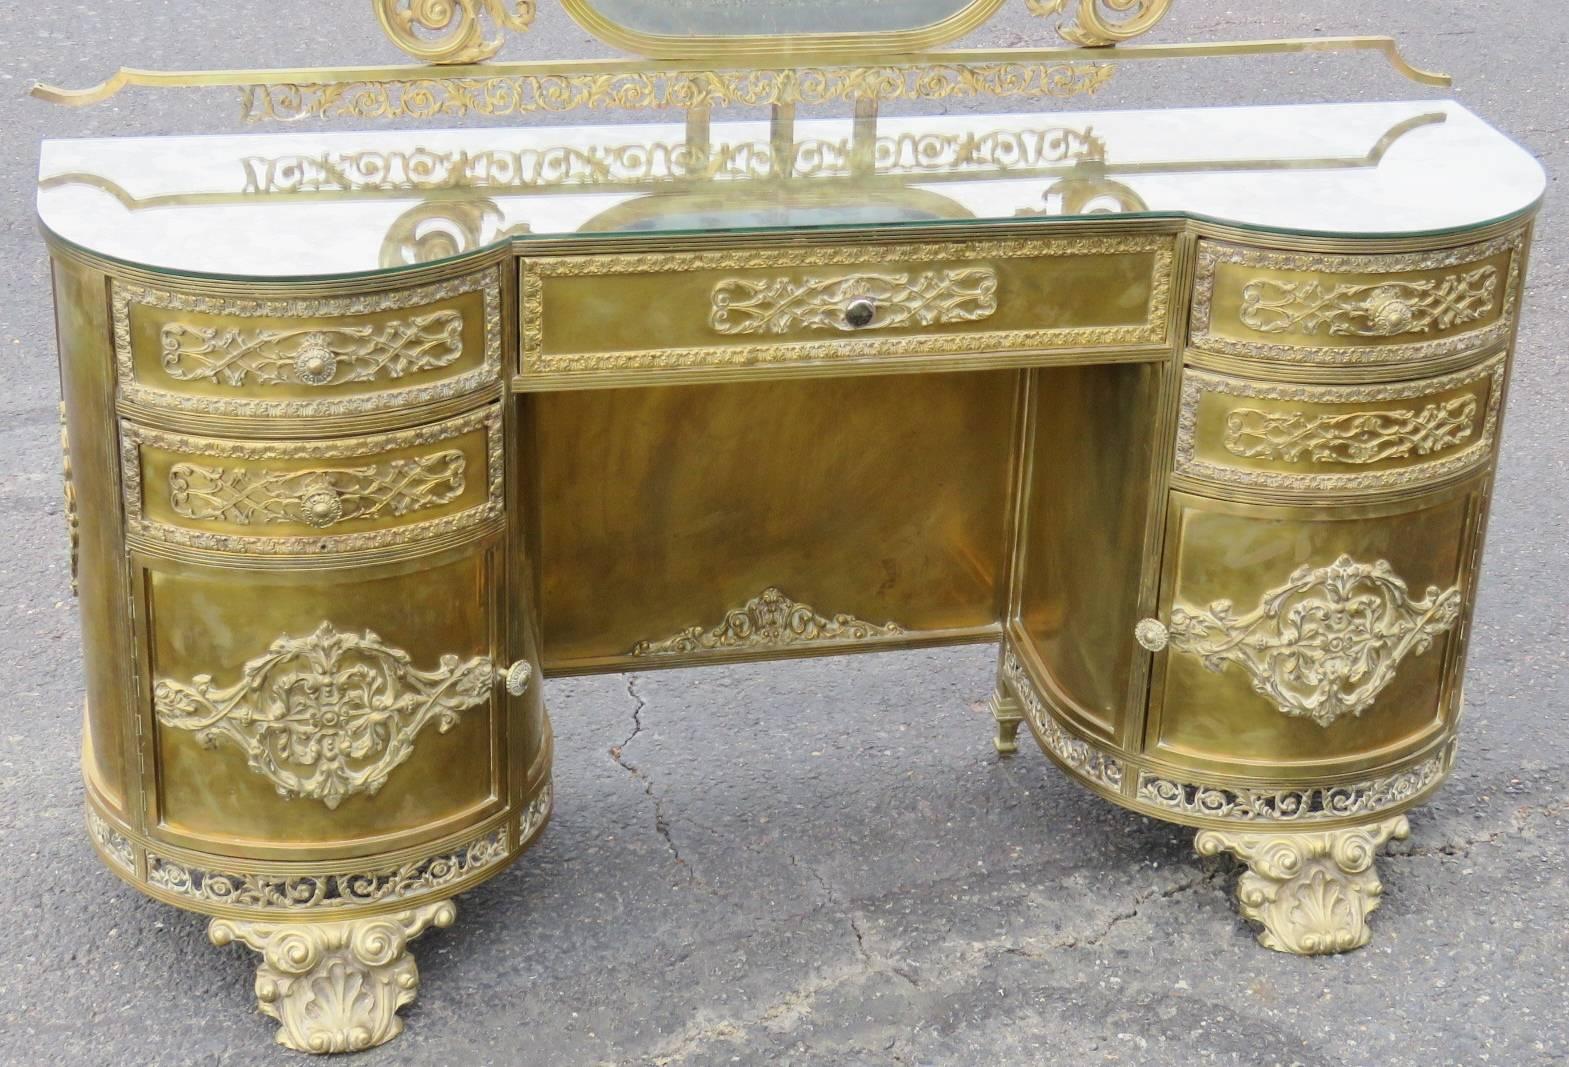 Églomiséd mirrored top. Metal decorated vanity and mirror. Beveled glass mirror.